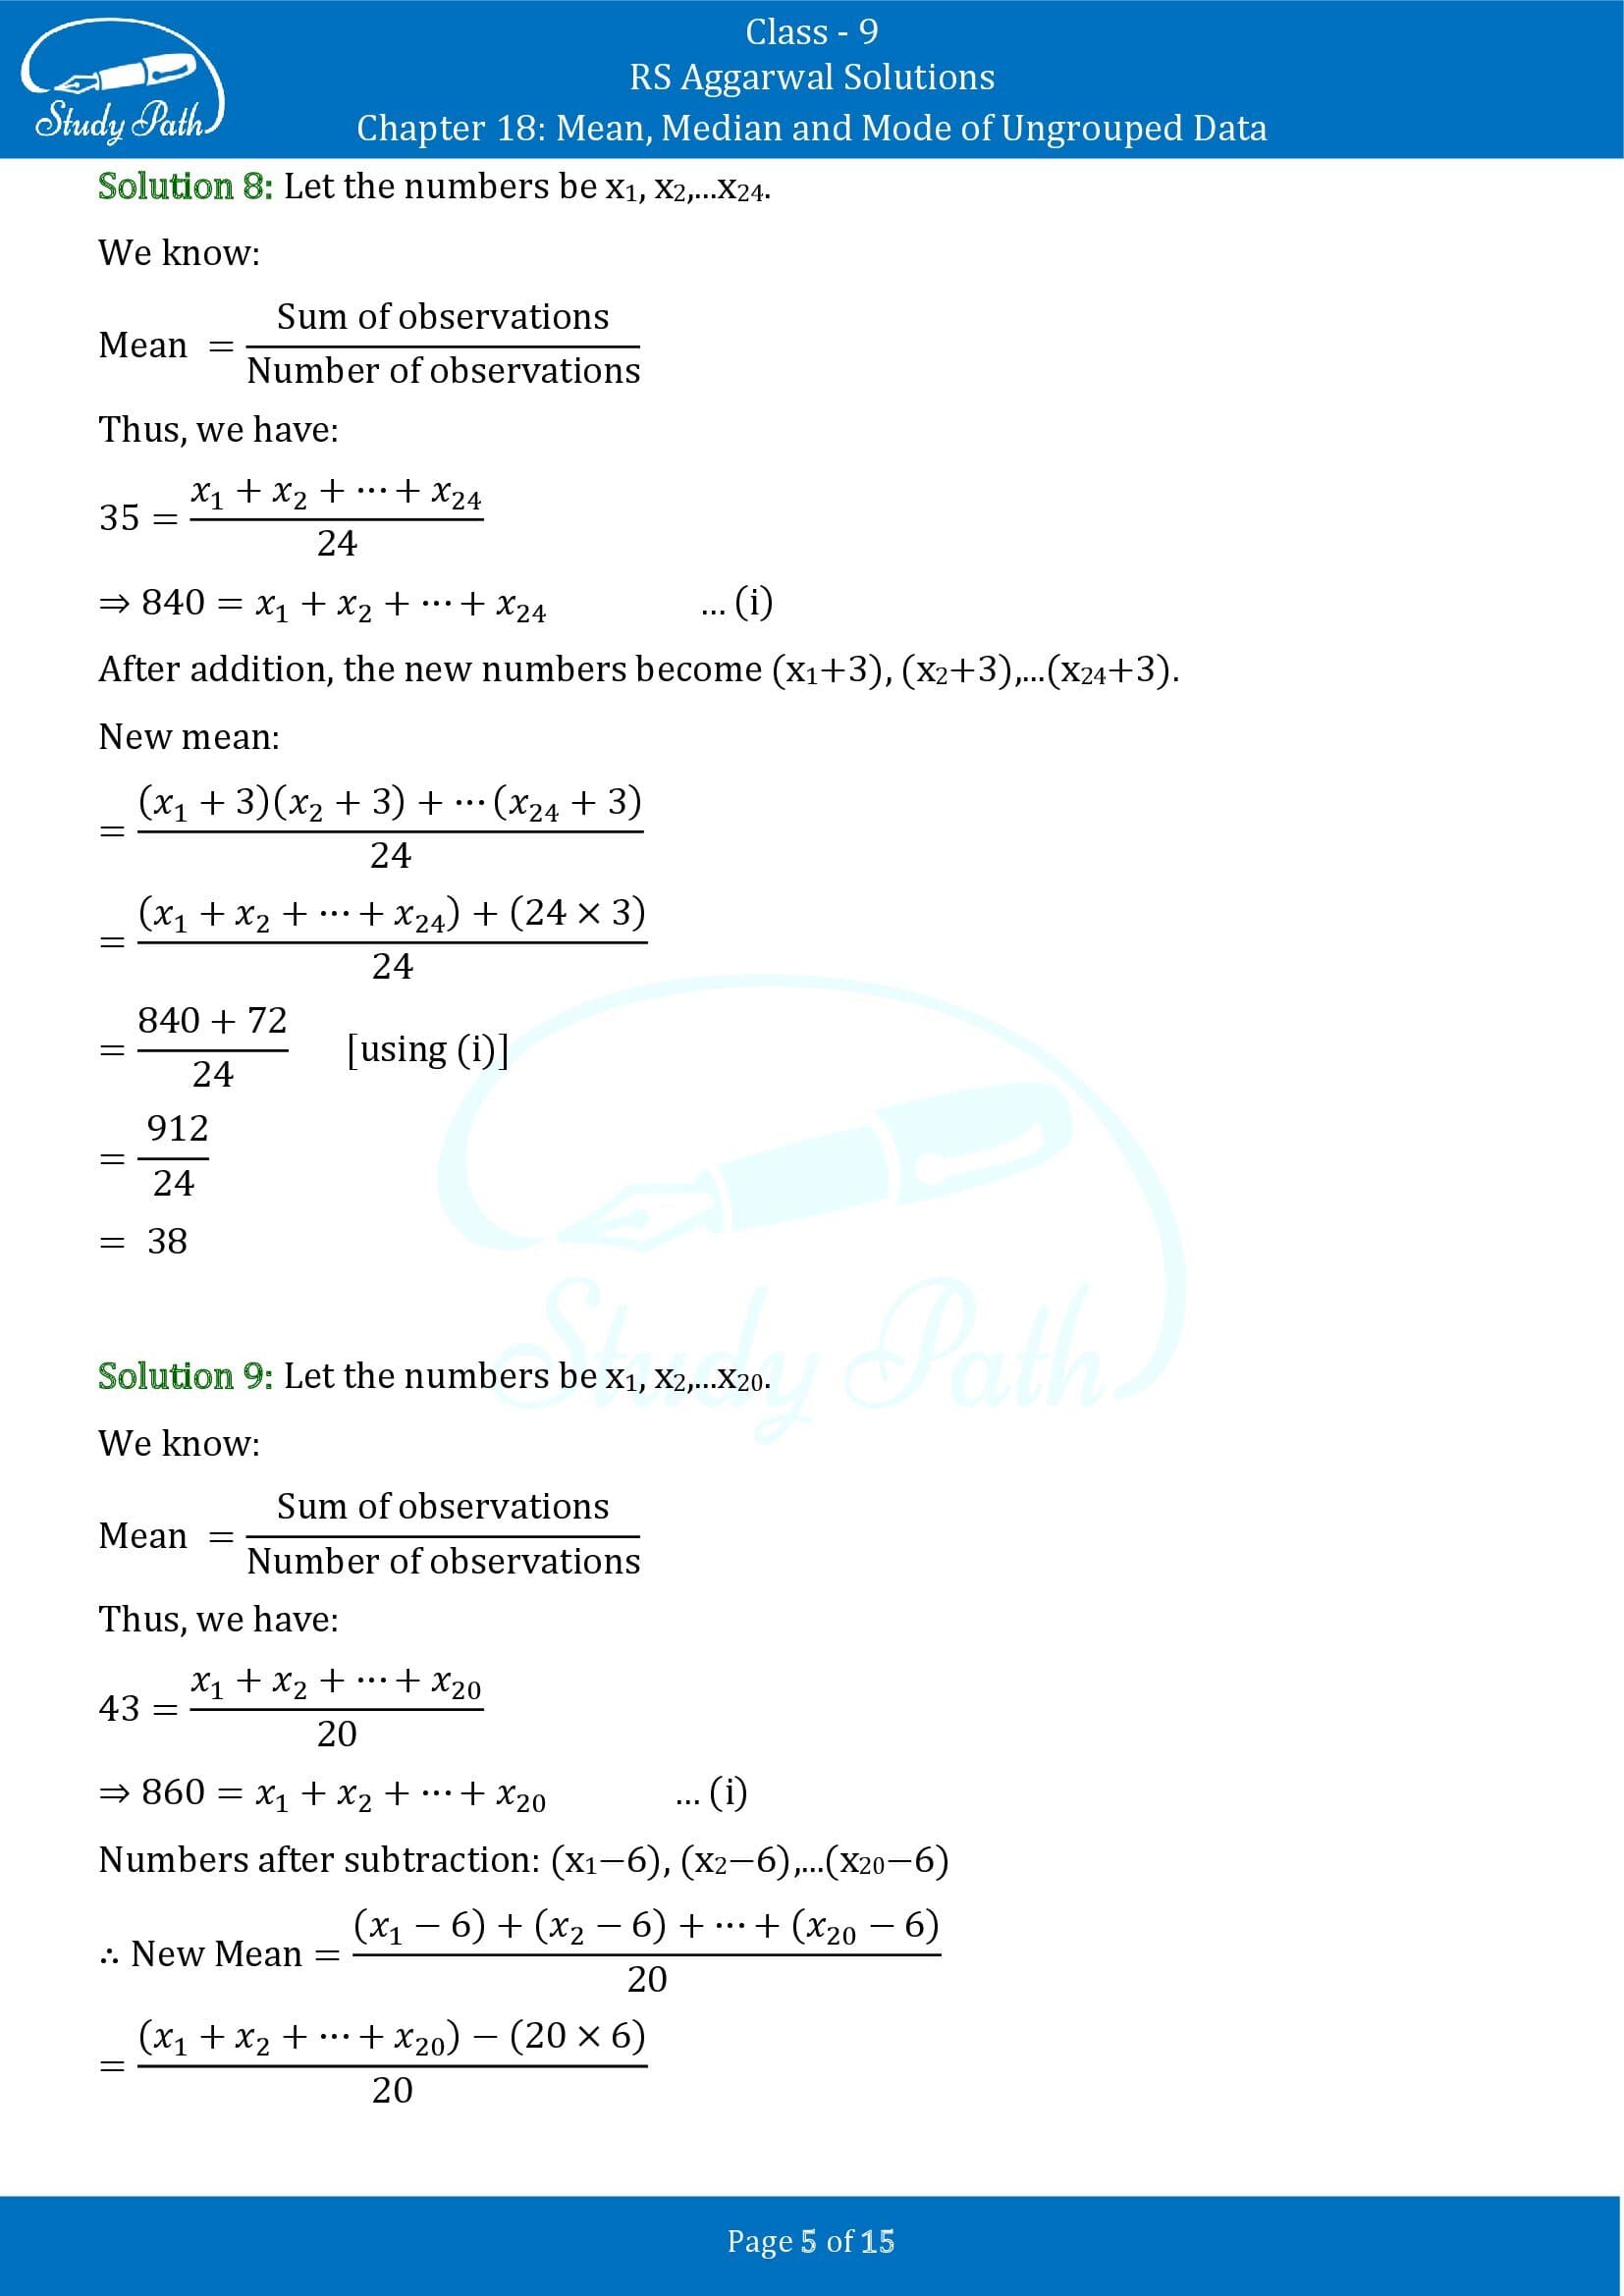 RS Aggarwal Solutions Class 9 Chapter 18 Mean Median and Mode of Ungrouped Data Exercise 18A 00005